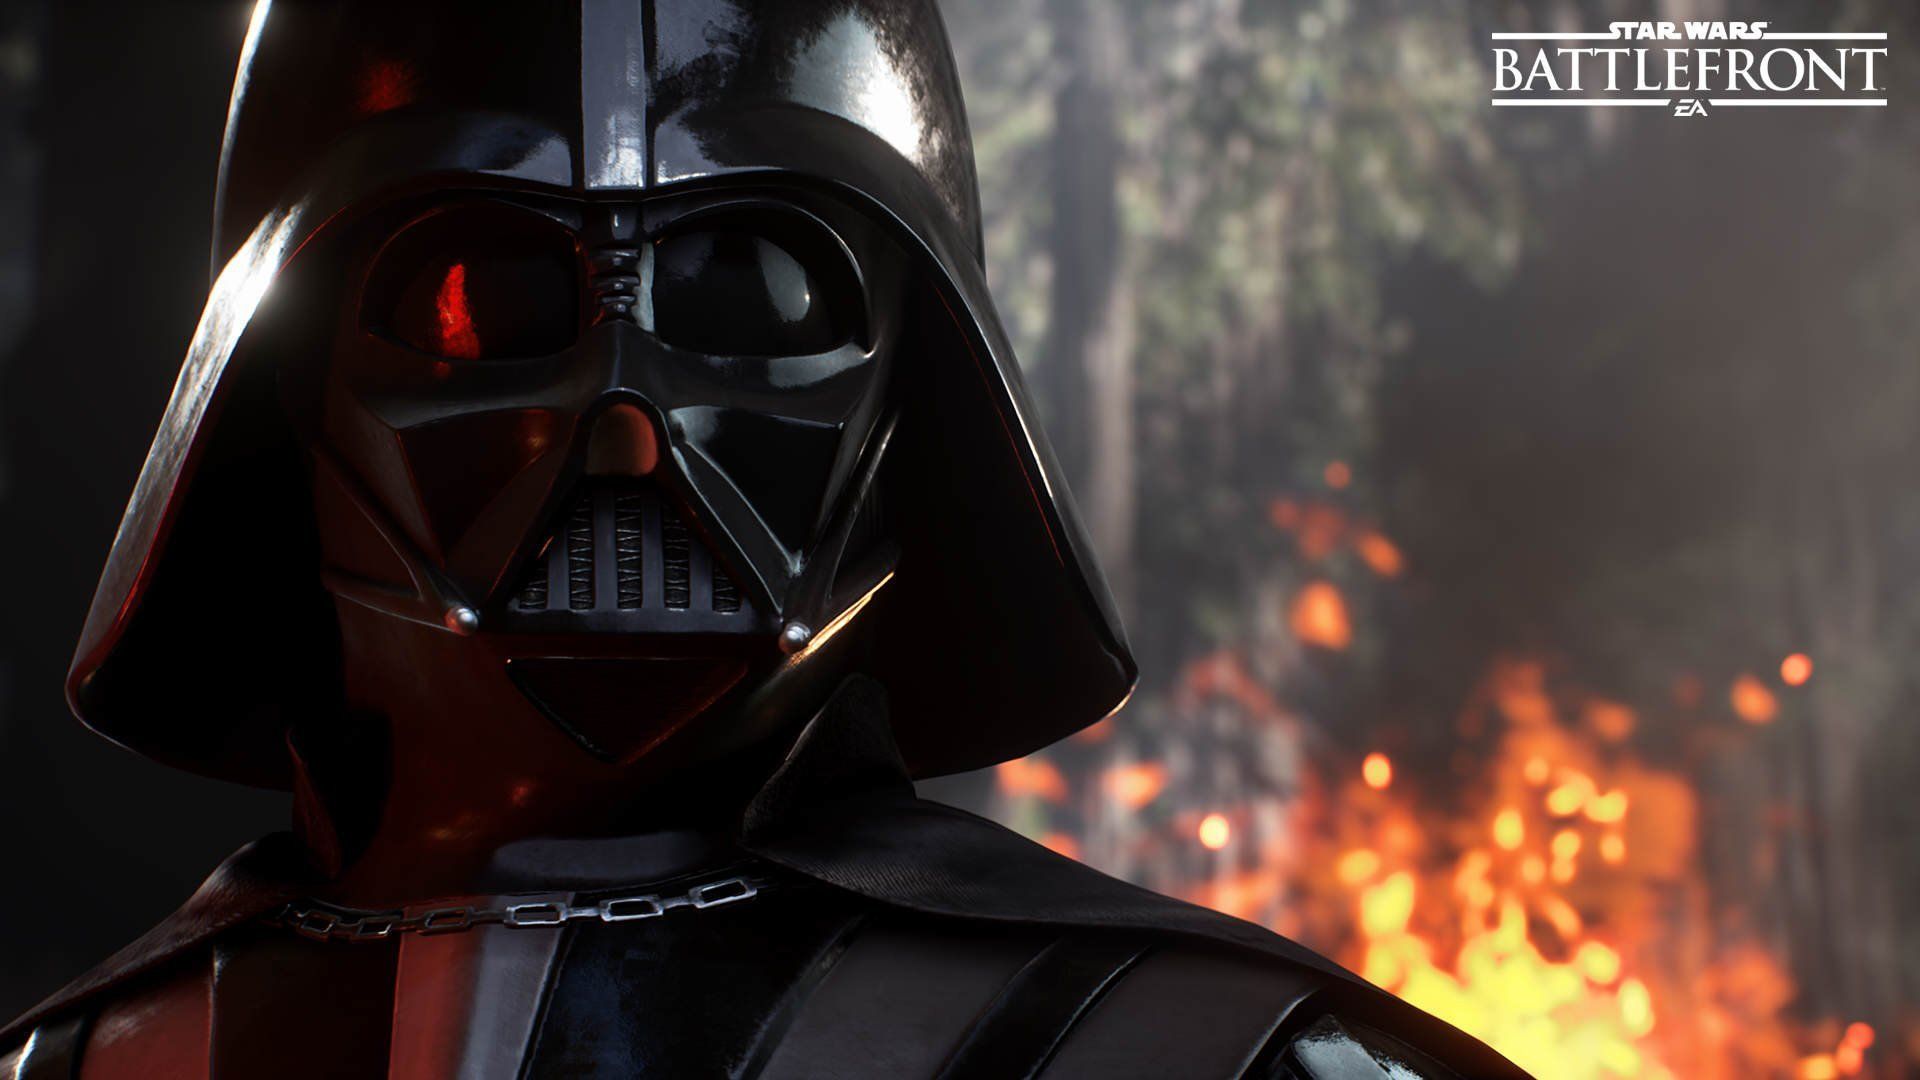 Star Wars: Battlefront features playable heroes and villains including Darth Vader